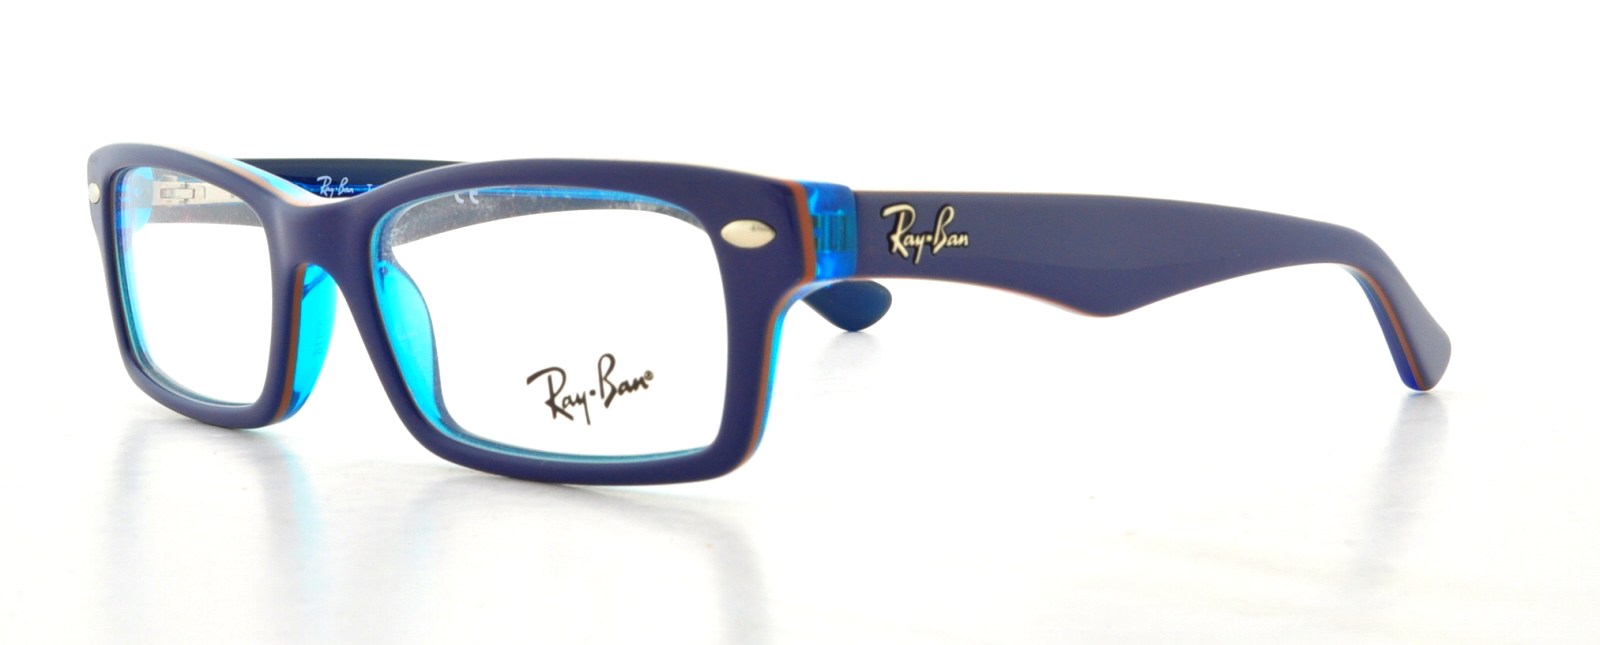 Picture of Ray Ban Jr Eyeglasses RY1530